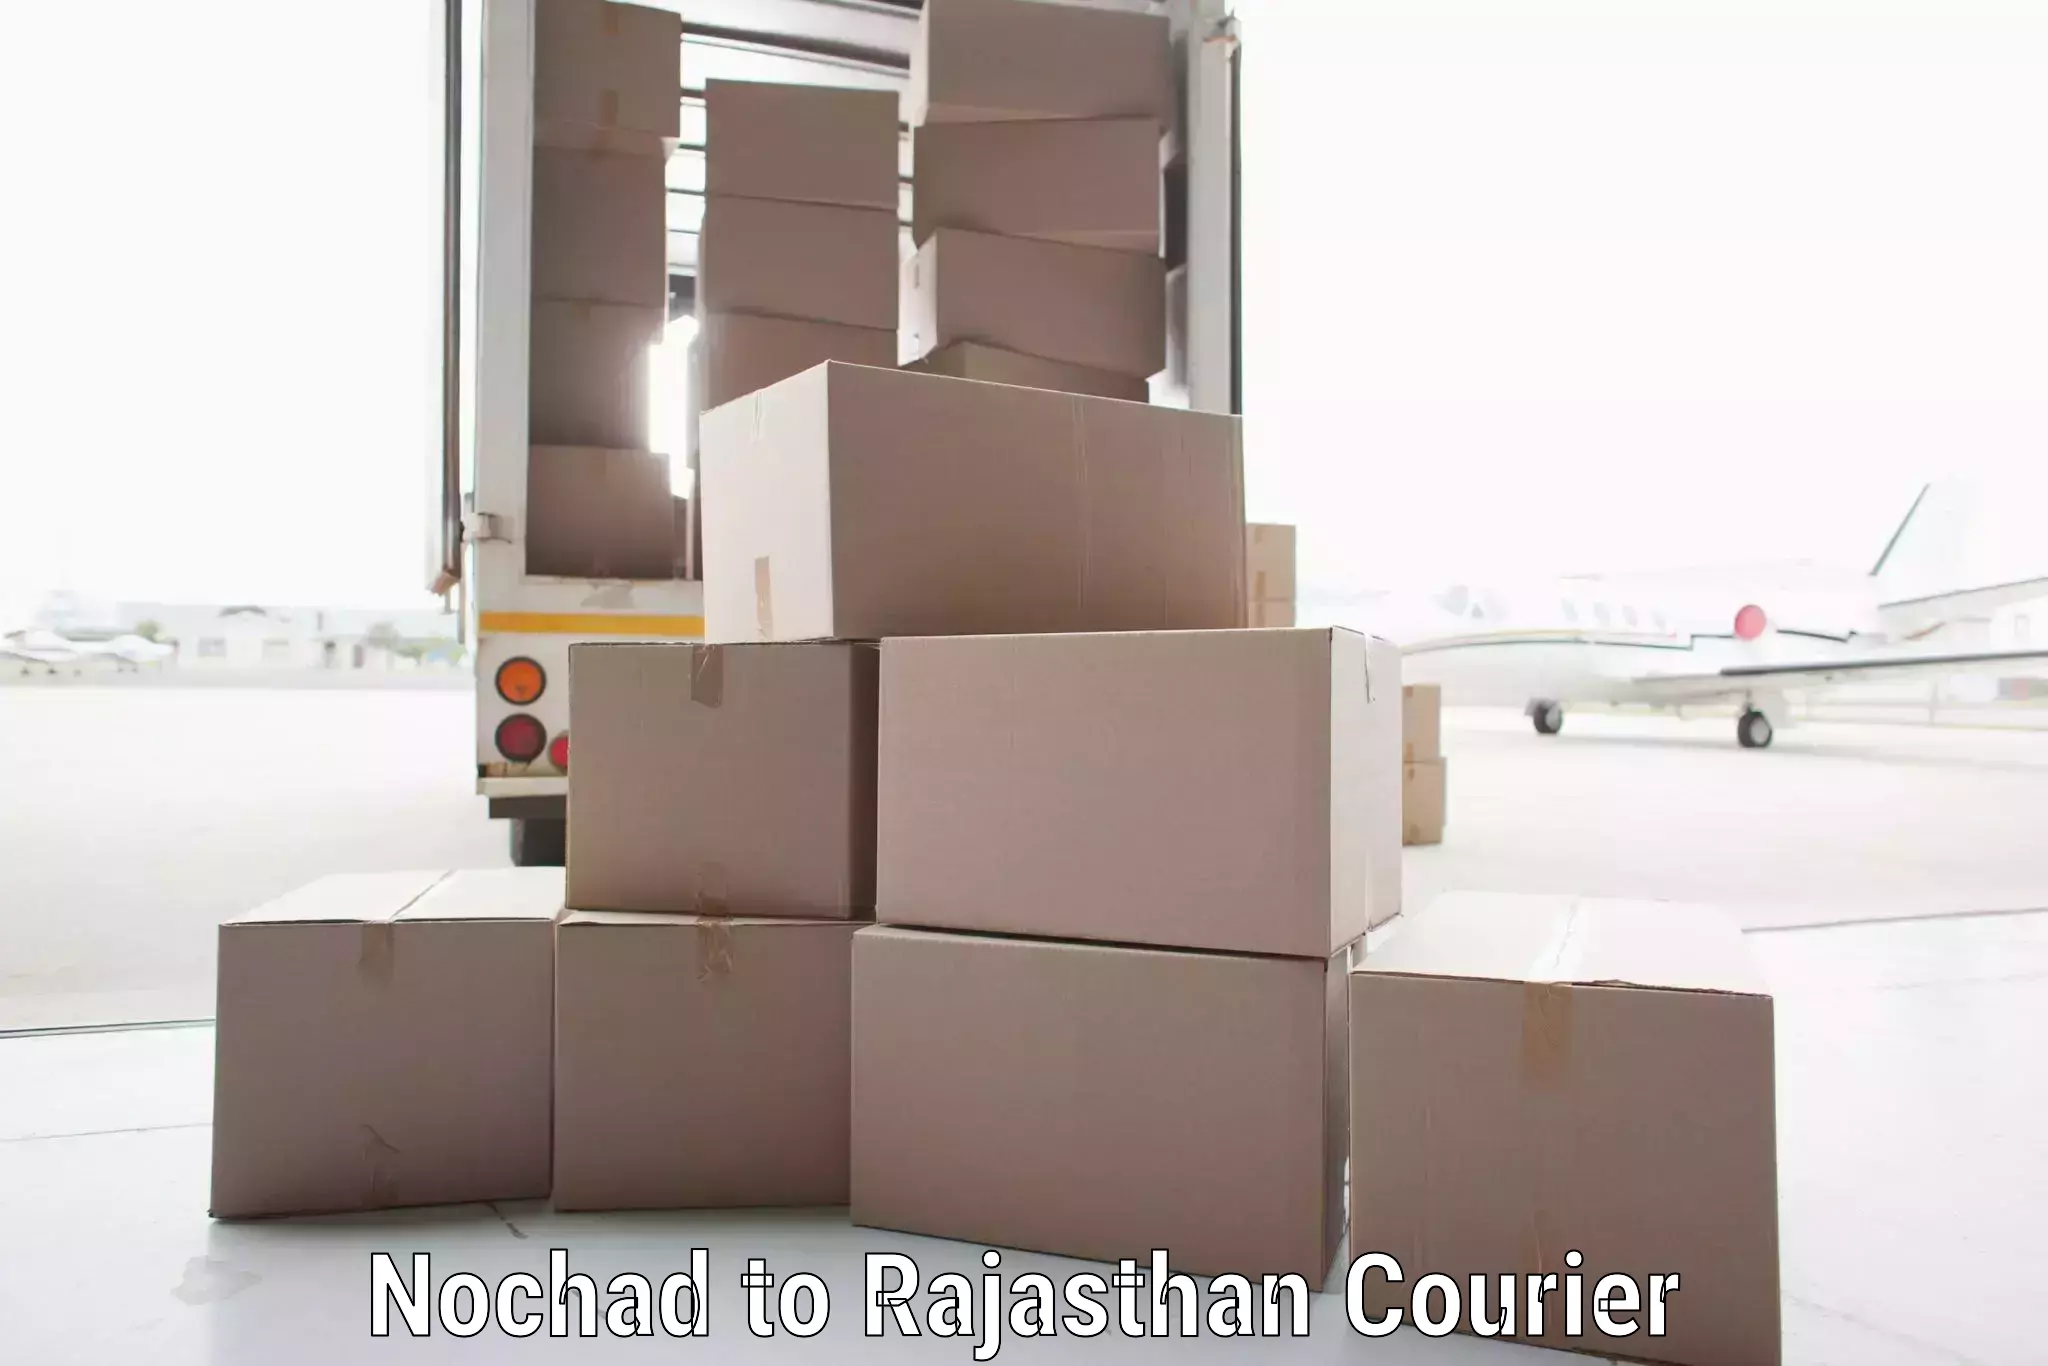 State-of-the-art courier technology Nochad to Ajeetgarh